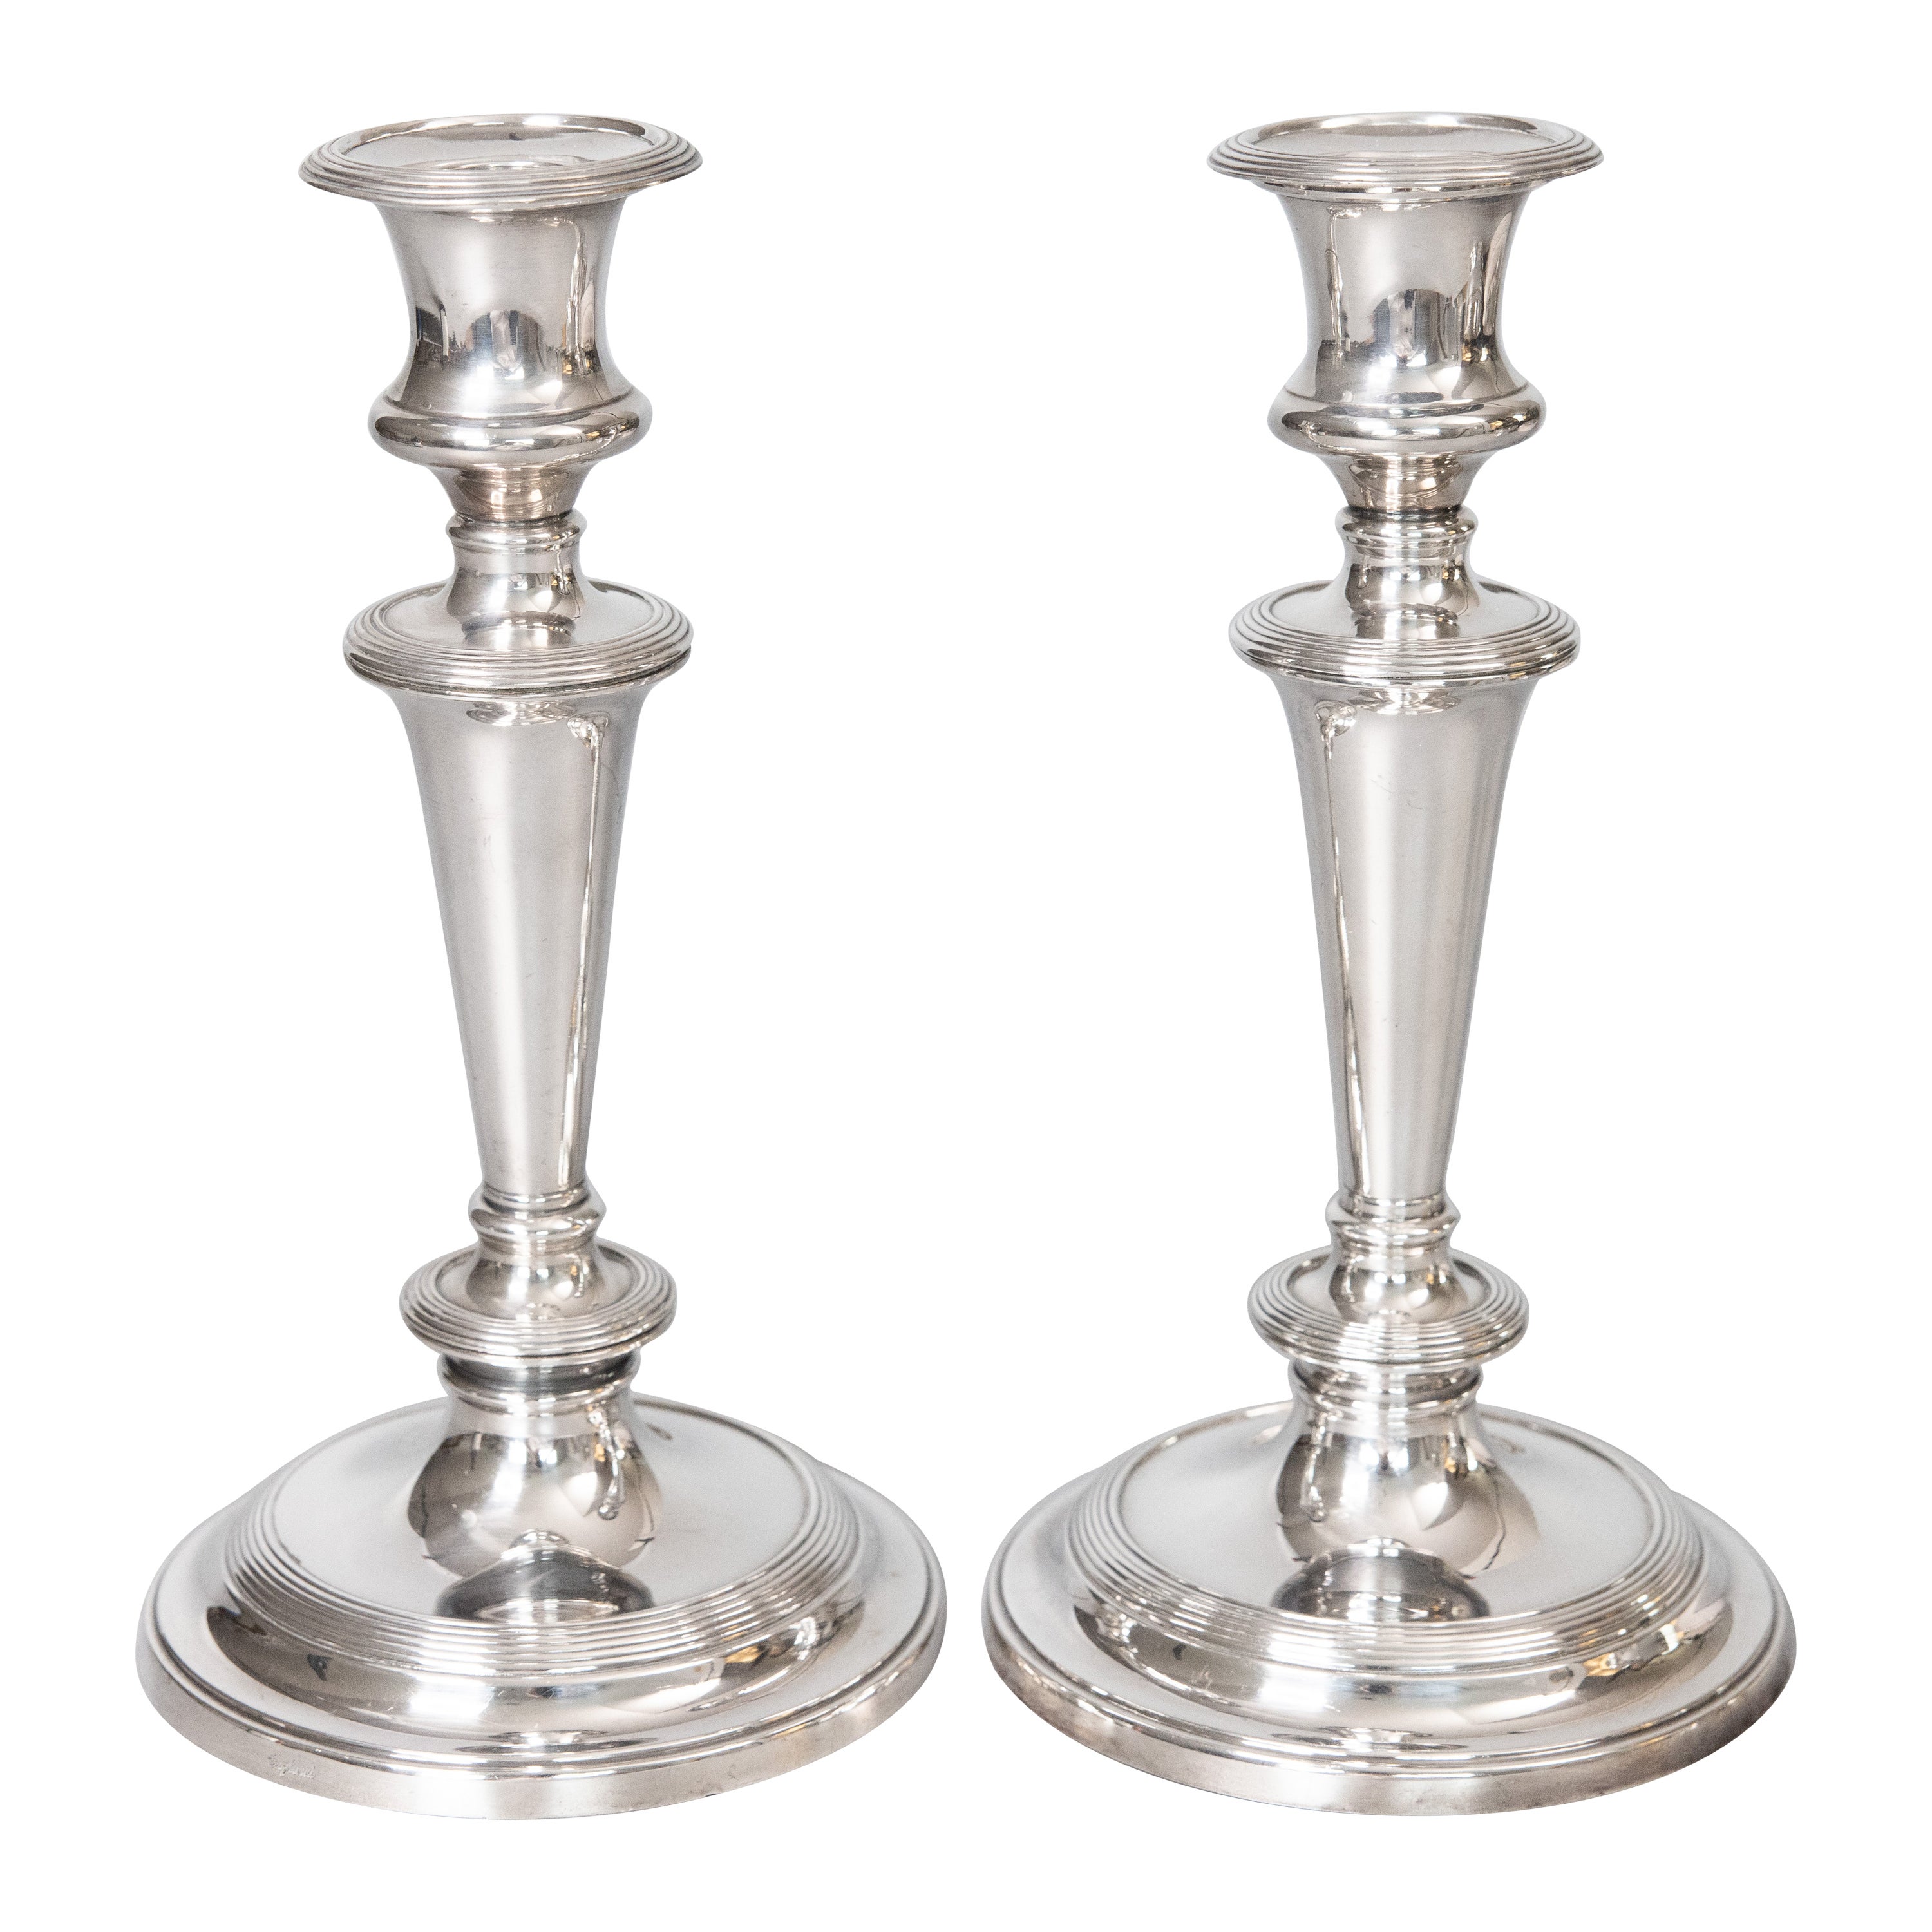 Pair of Antique English Silver Plate Candlesticks